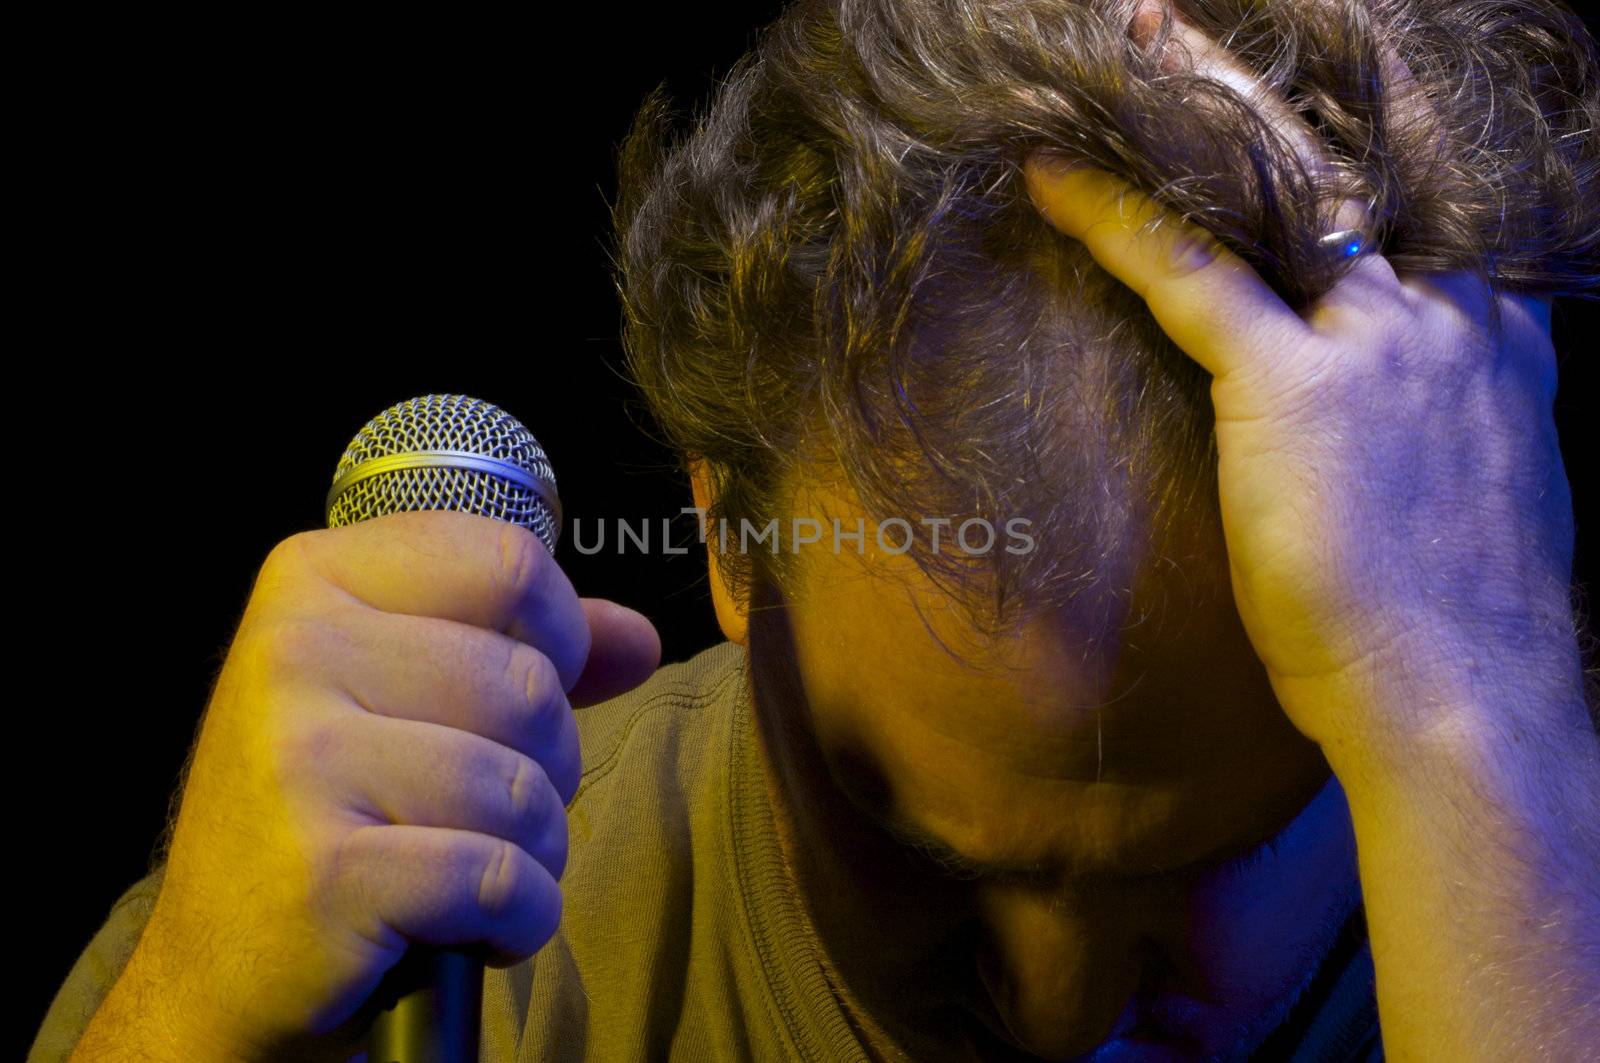 Passionate Vocalist with Microphone on a black background.